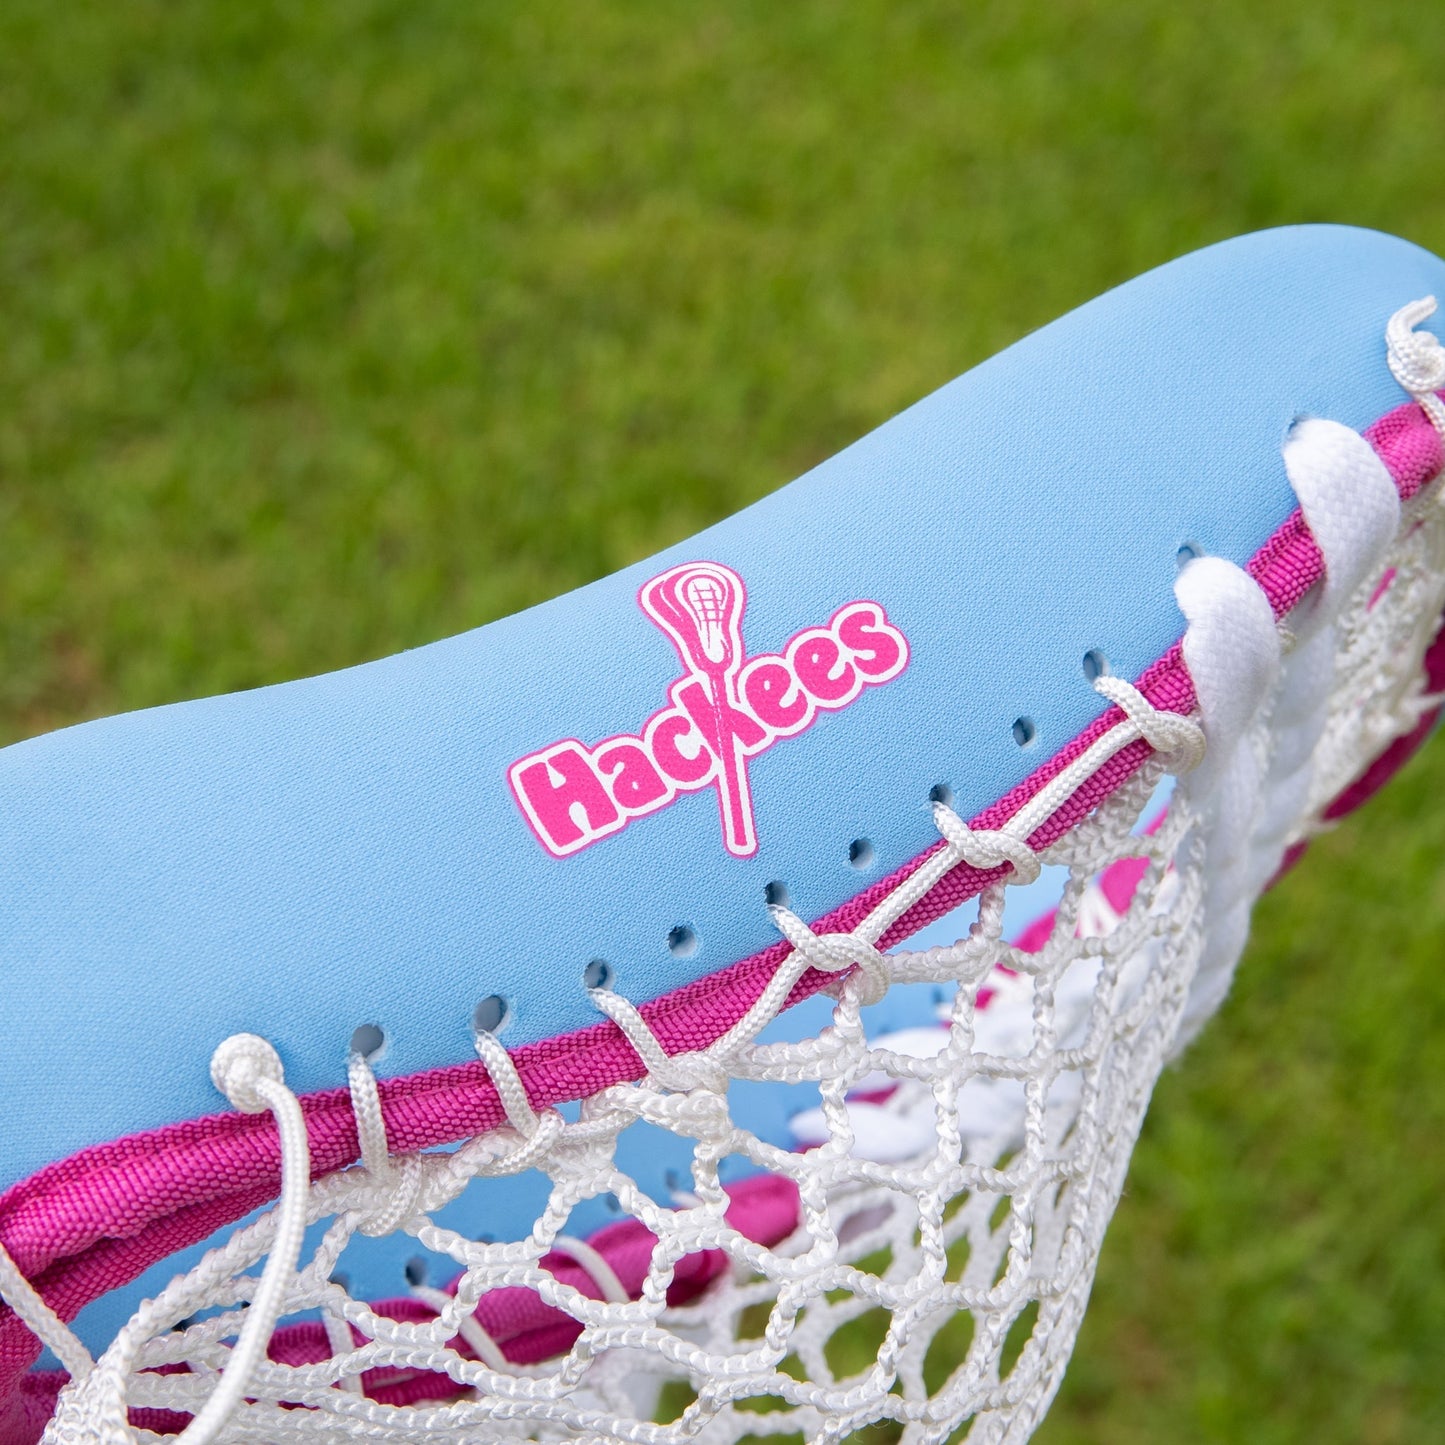 1 vs. 1 // Two Stick Pack Lacrosse Sticks Hackees 